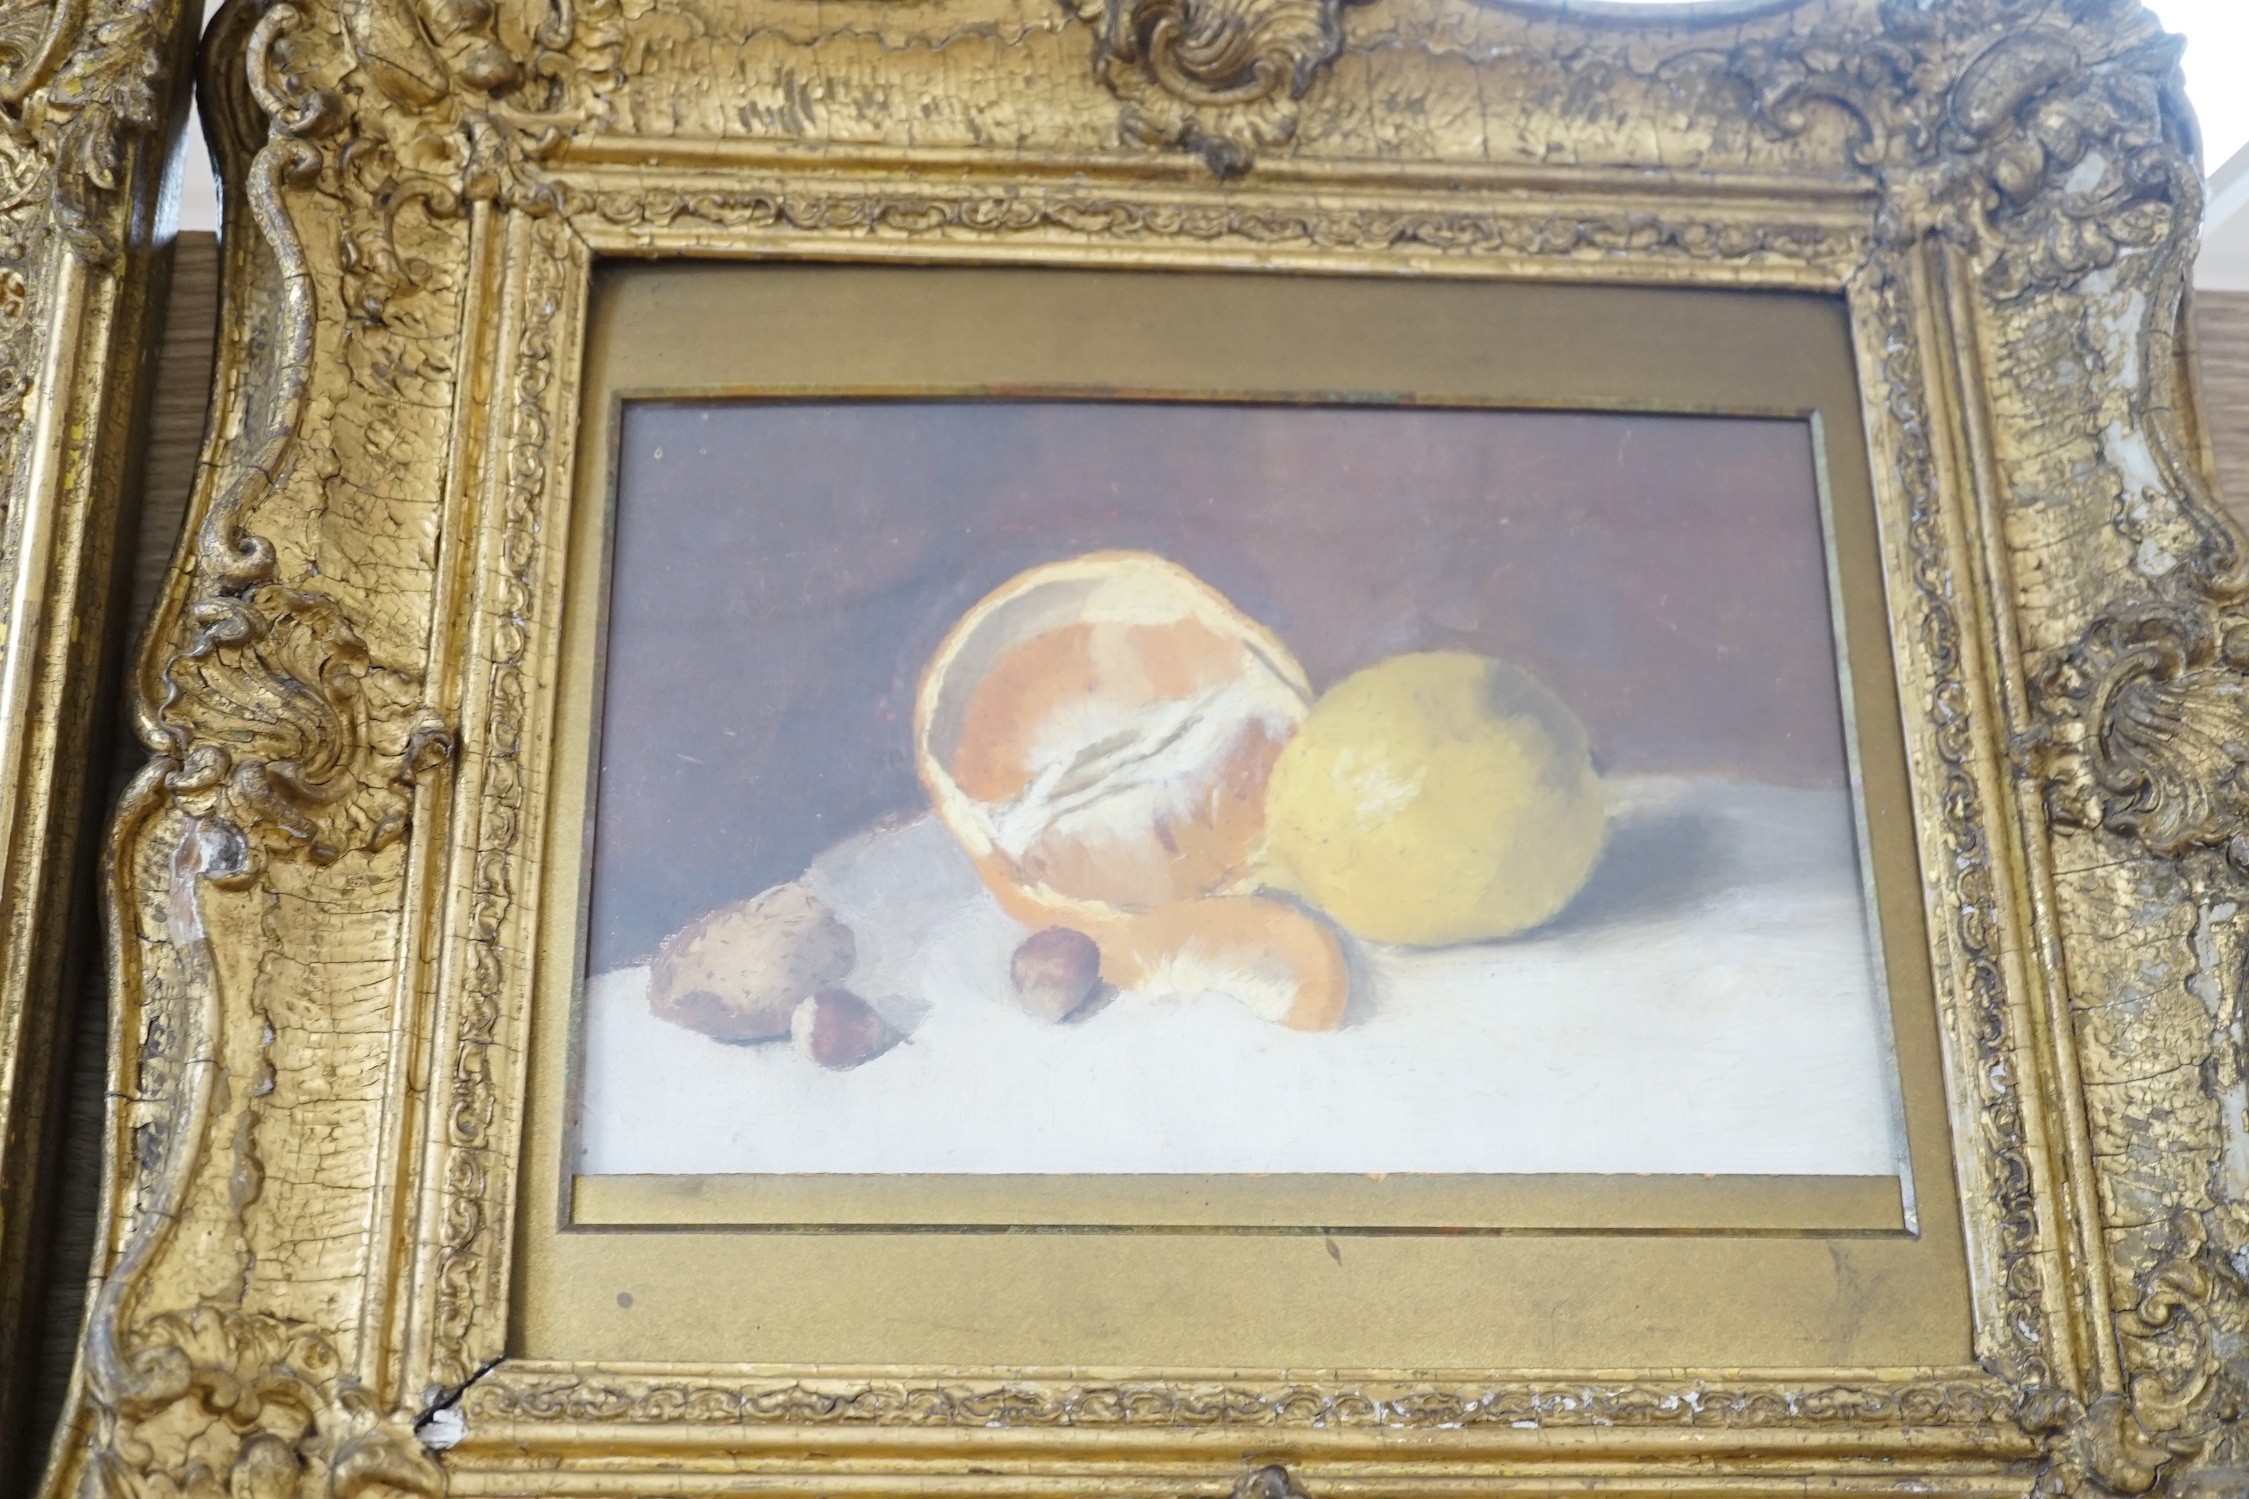 Victorian School, oil on canvas, Still life of fish upon a riverbank, 29 x 42cm, and a later oil sketch of fruit